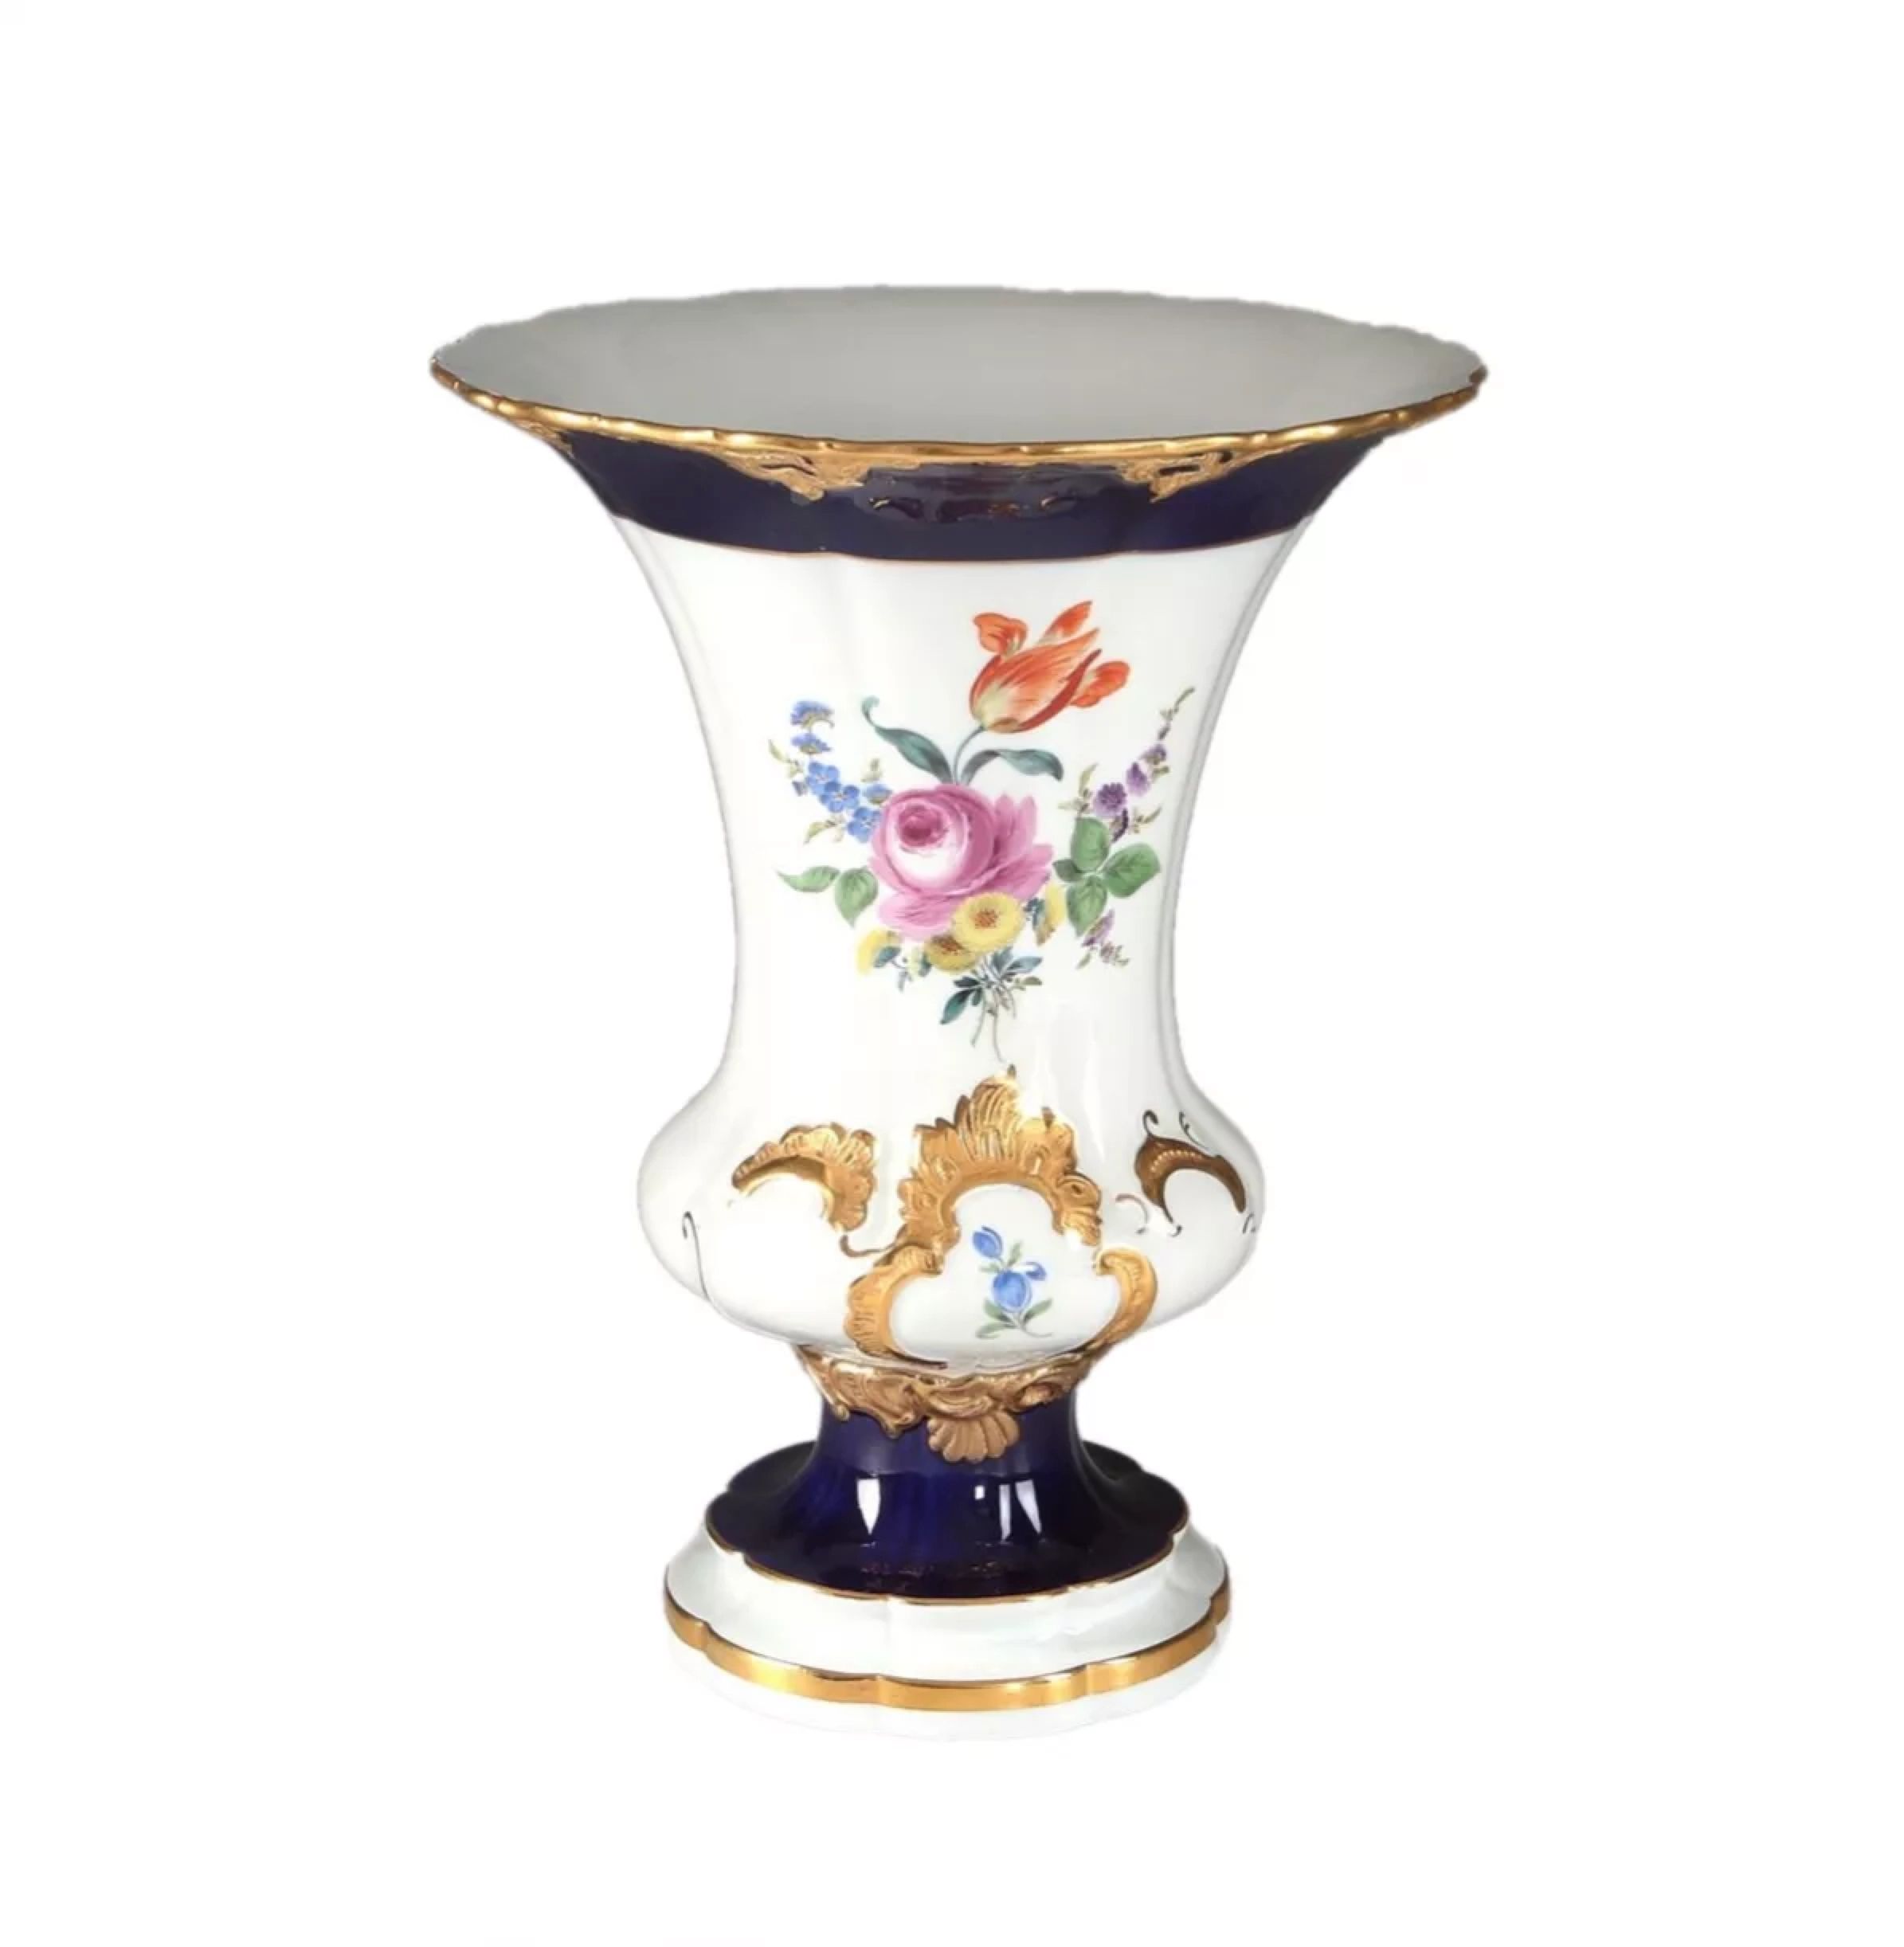 Painted-Meissen-vase-with-gold-cartouches-and-cobalt-